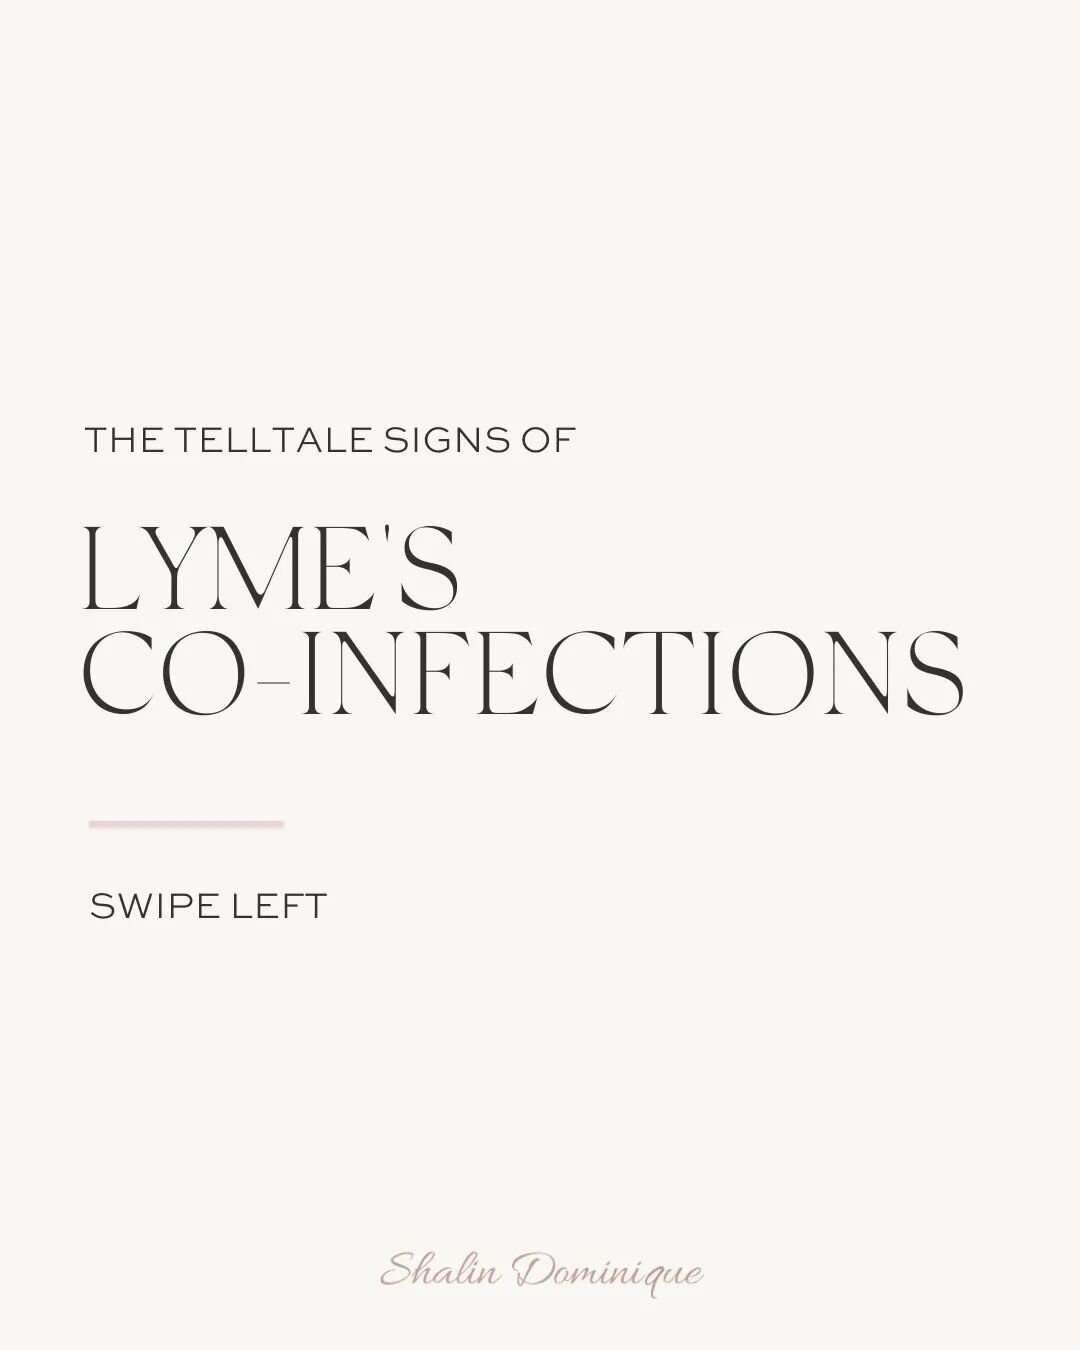 ❌ LYME DISEASE RARELY COMES ALONE ❌

This type of disease, unfortunately, has friends that tag along for the ride once it enters and stays in your system:👇

🦠 Babesia may sneak in with night sweats, air hunger, rib pain, and temperature fluctuation